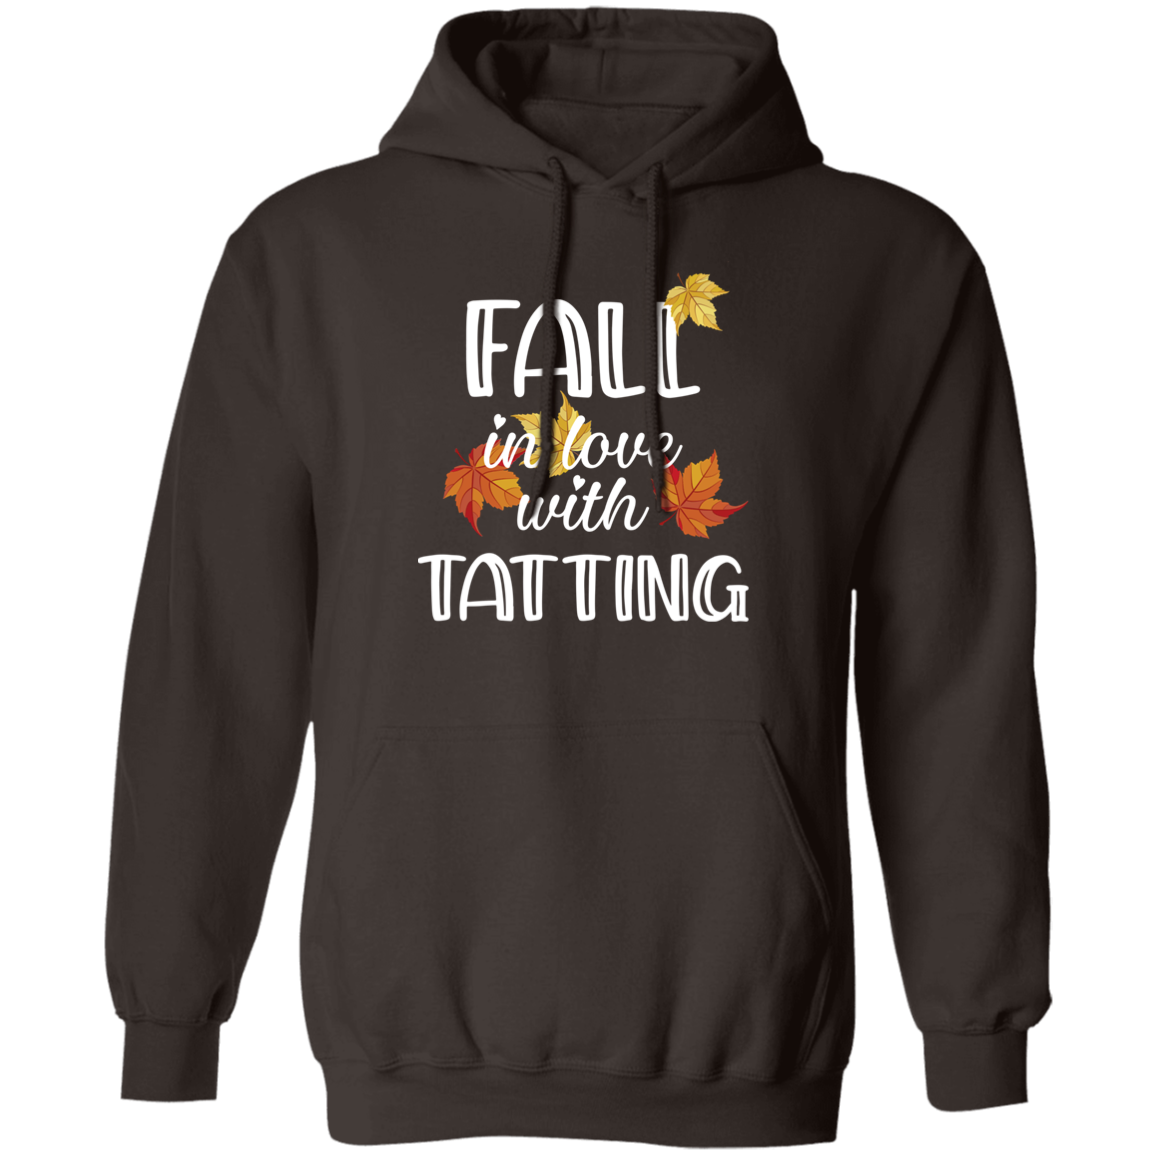 Fall in Love with Tatting Pullover Hoodie